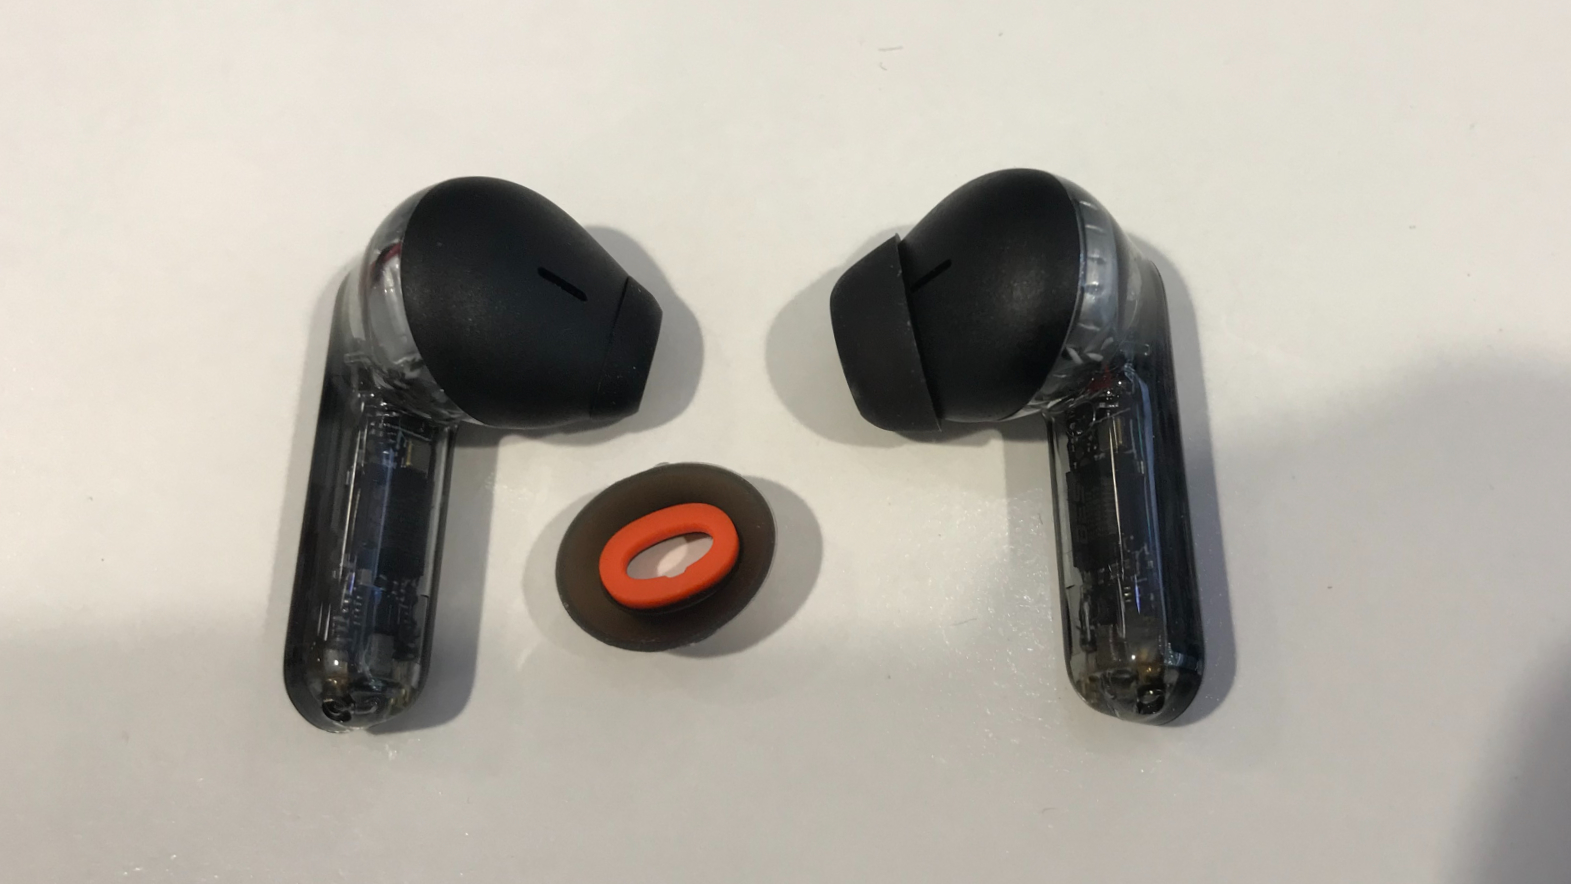 JBL Tune Flex headphones with open-end left and closed-end right